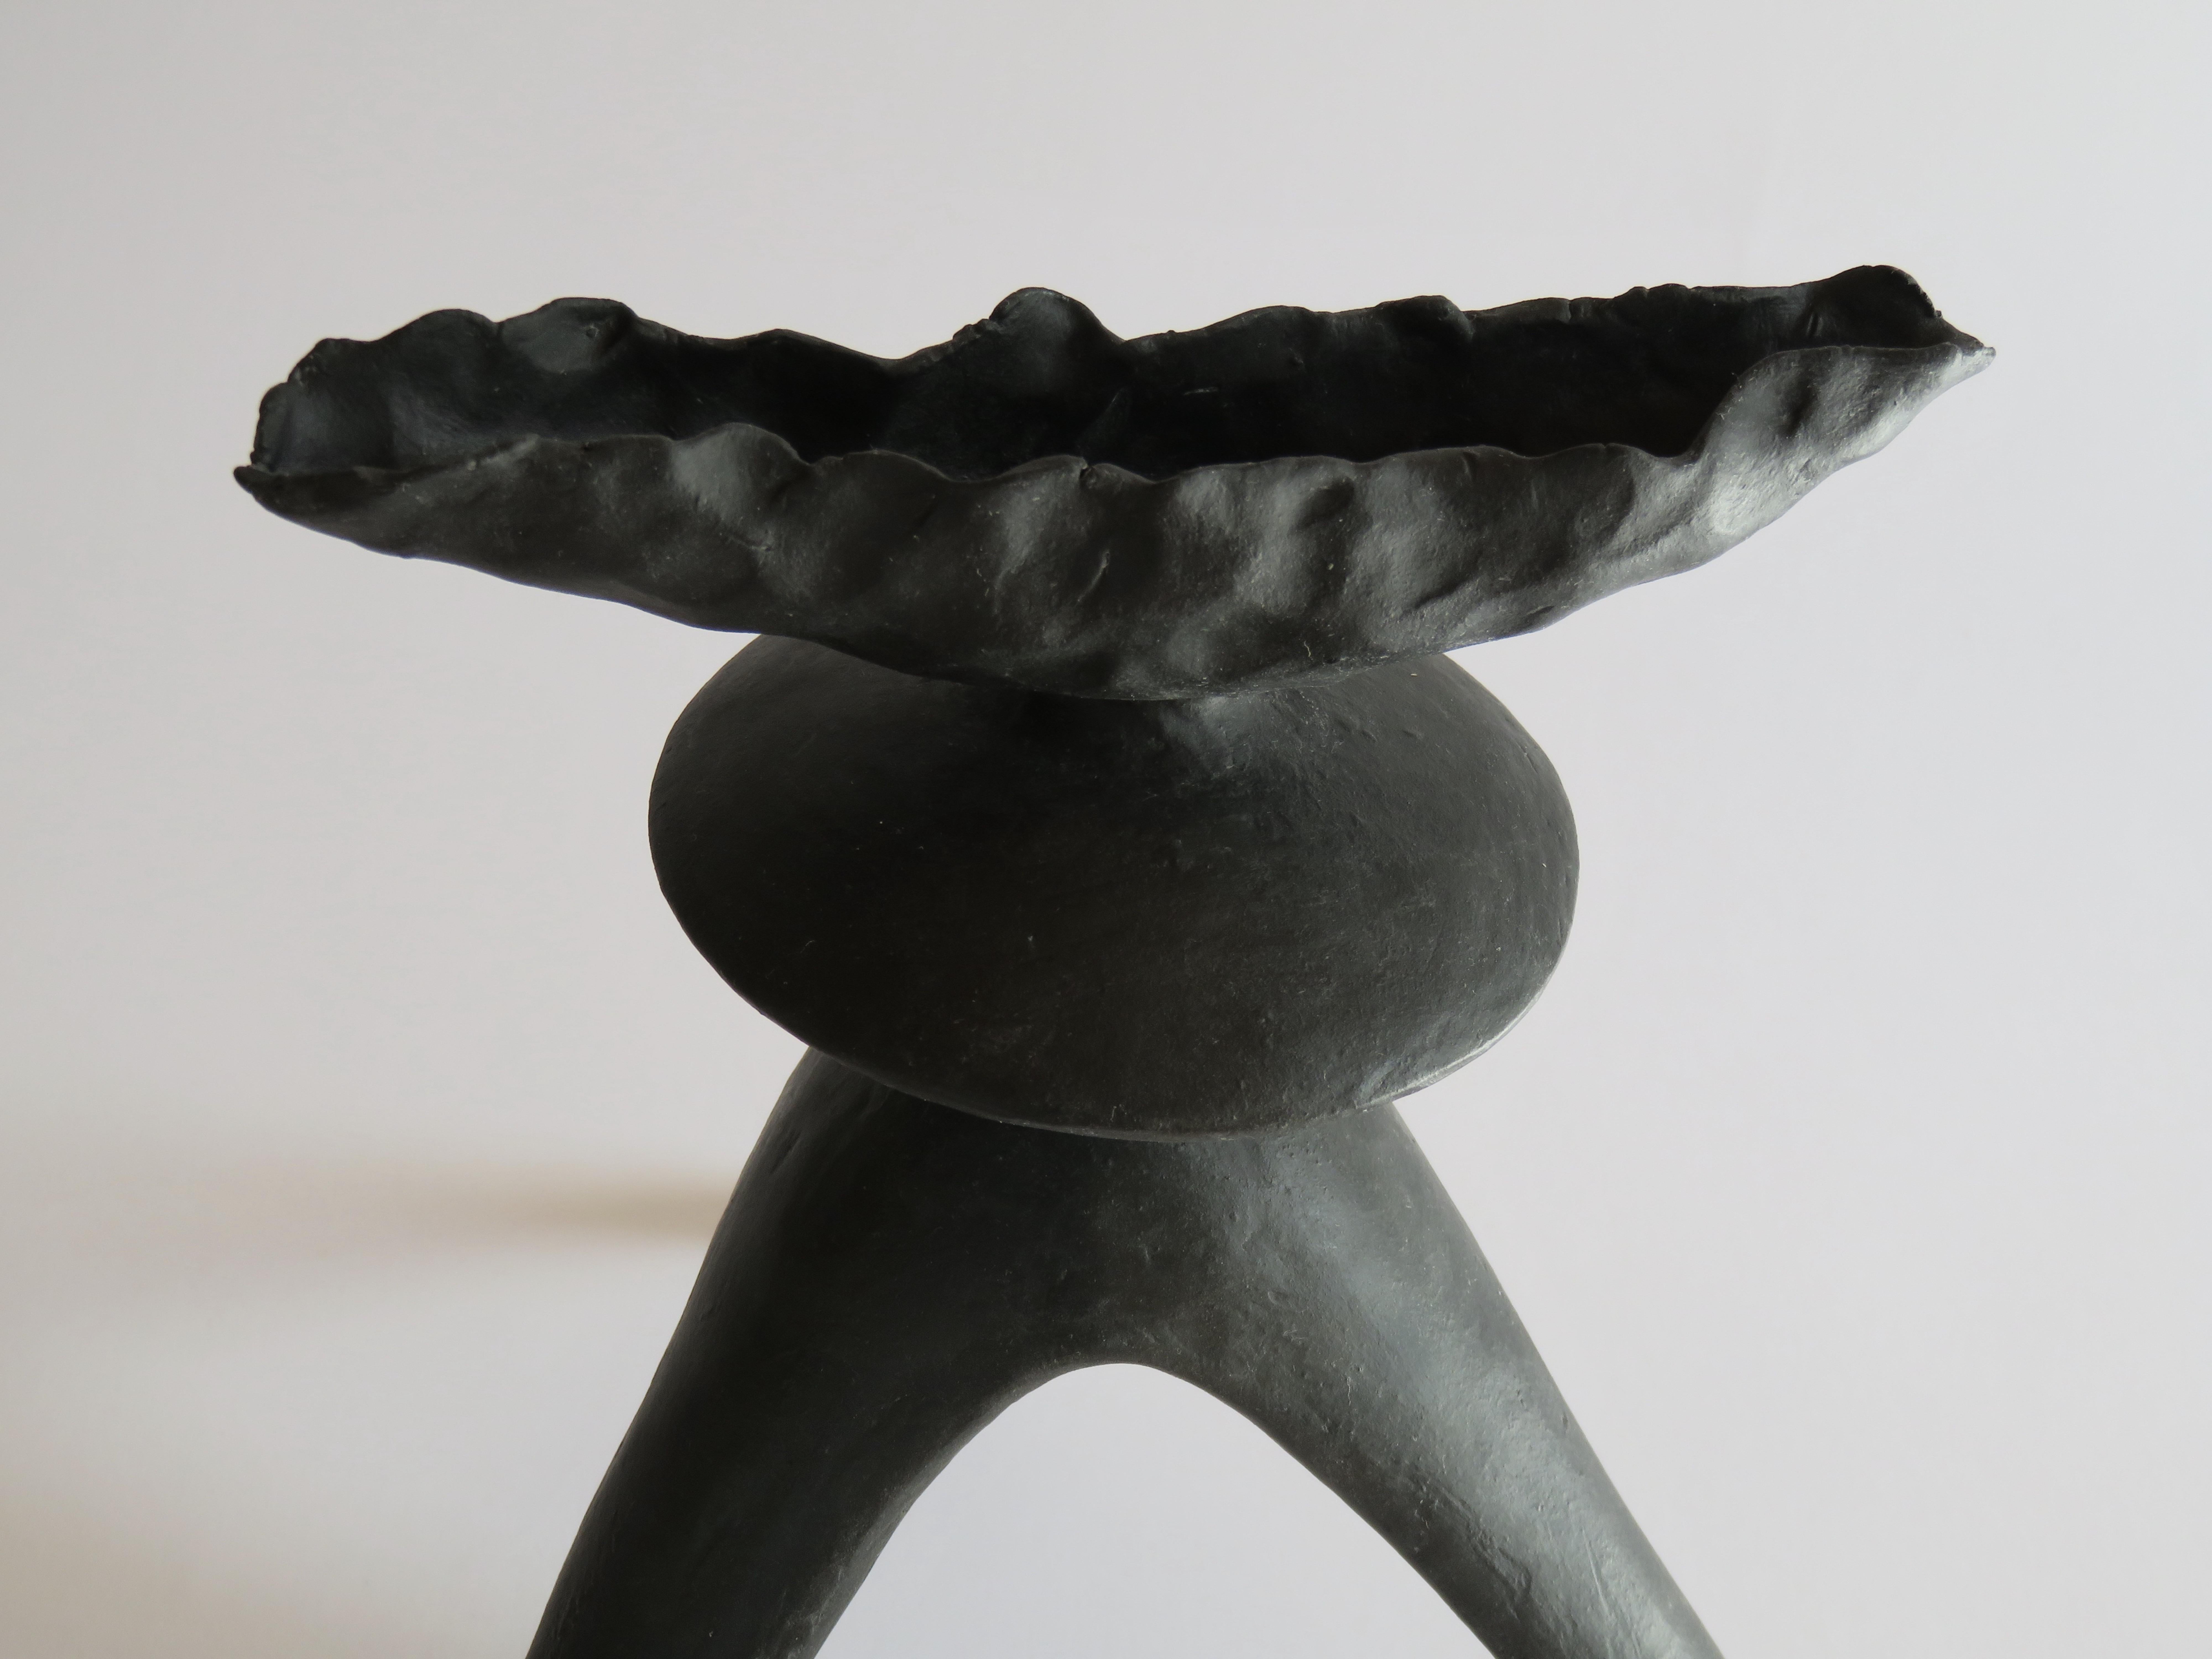 Crimped-Top Black Ceramic TOTEM with Middle Sphere on Tripod Legs, Hand Built 3